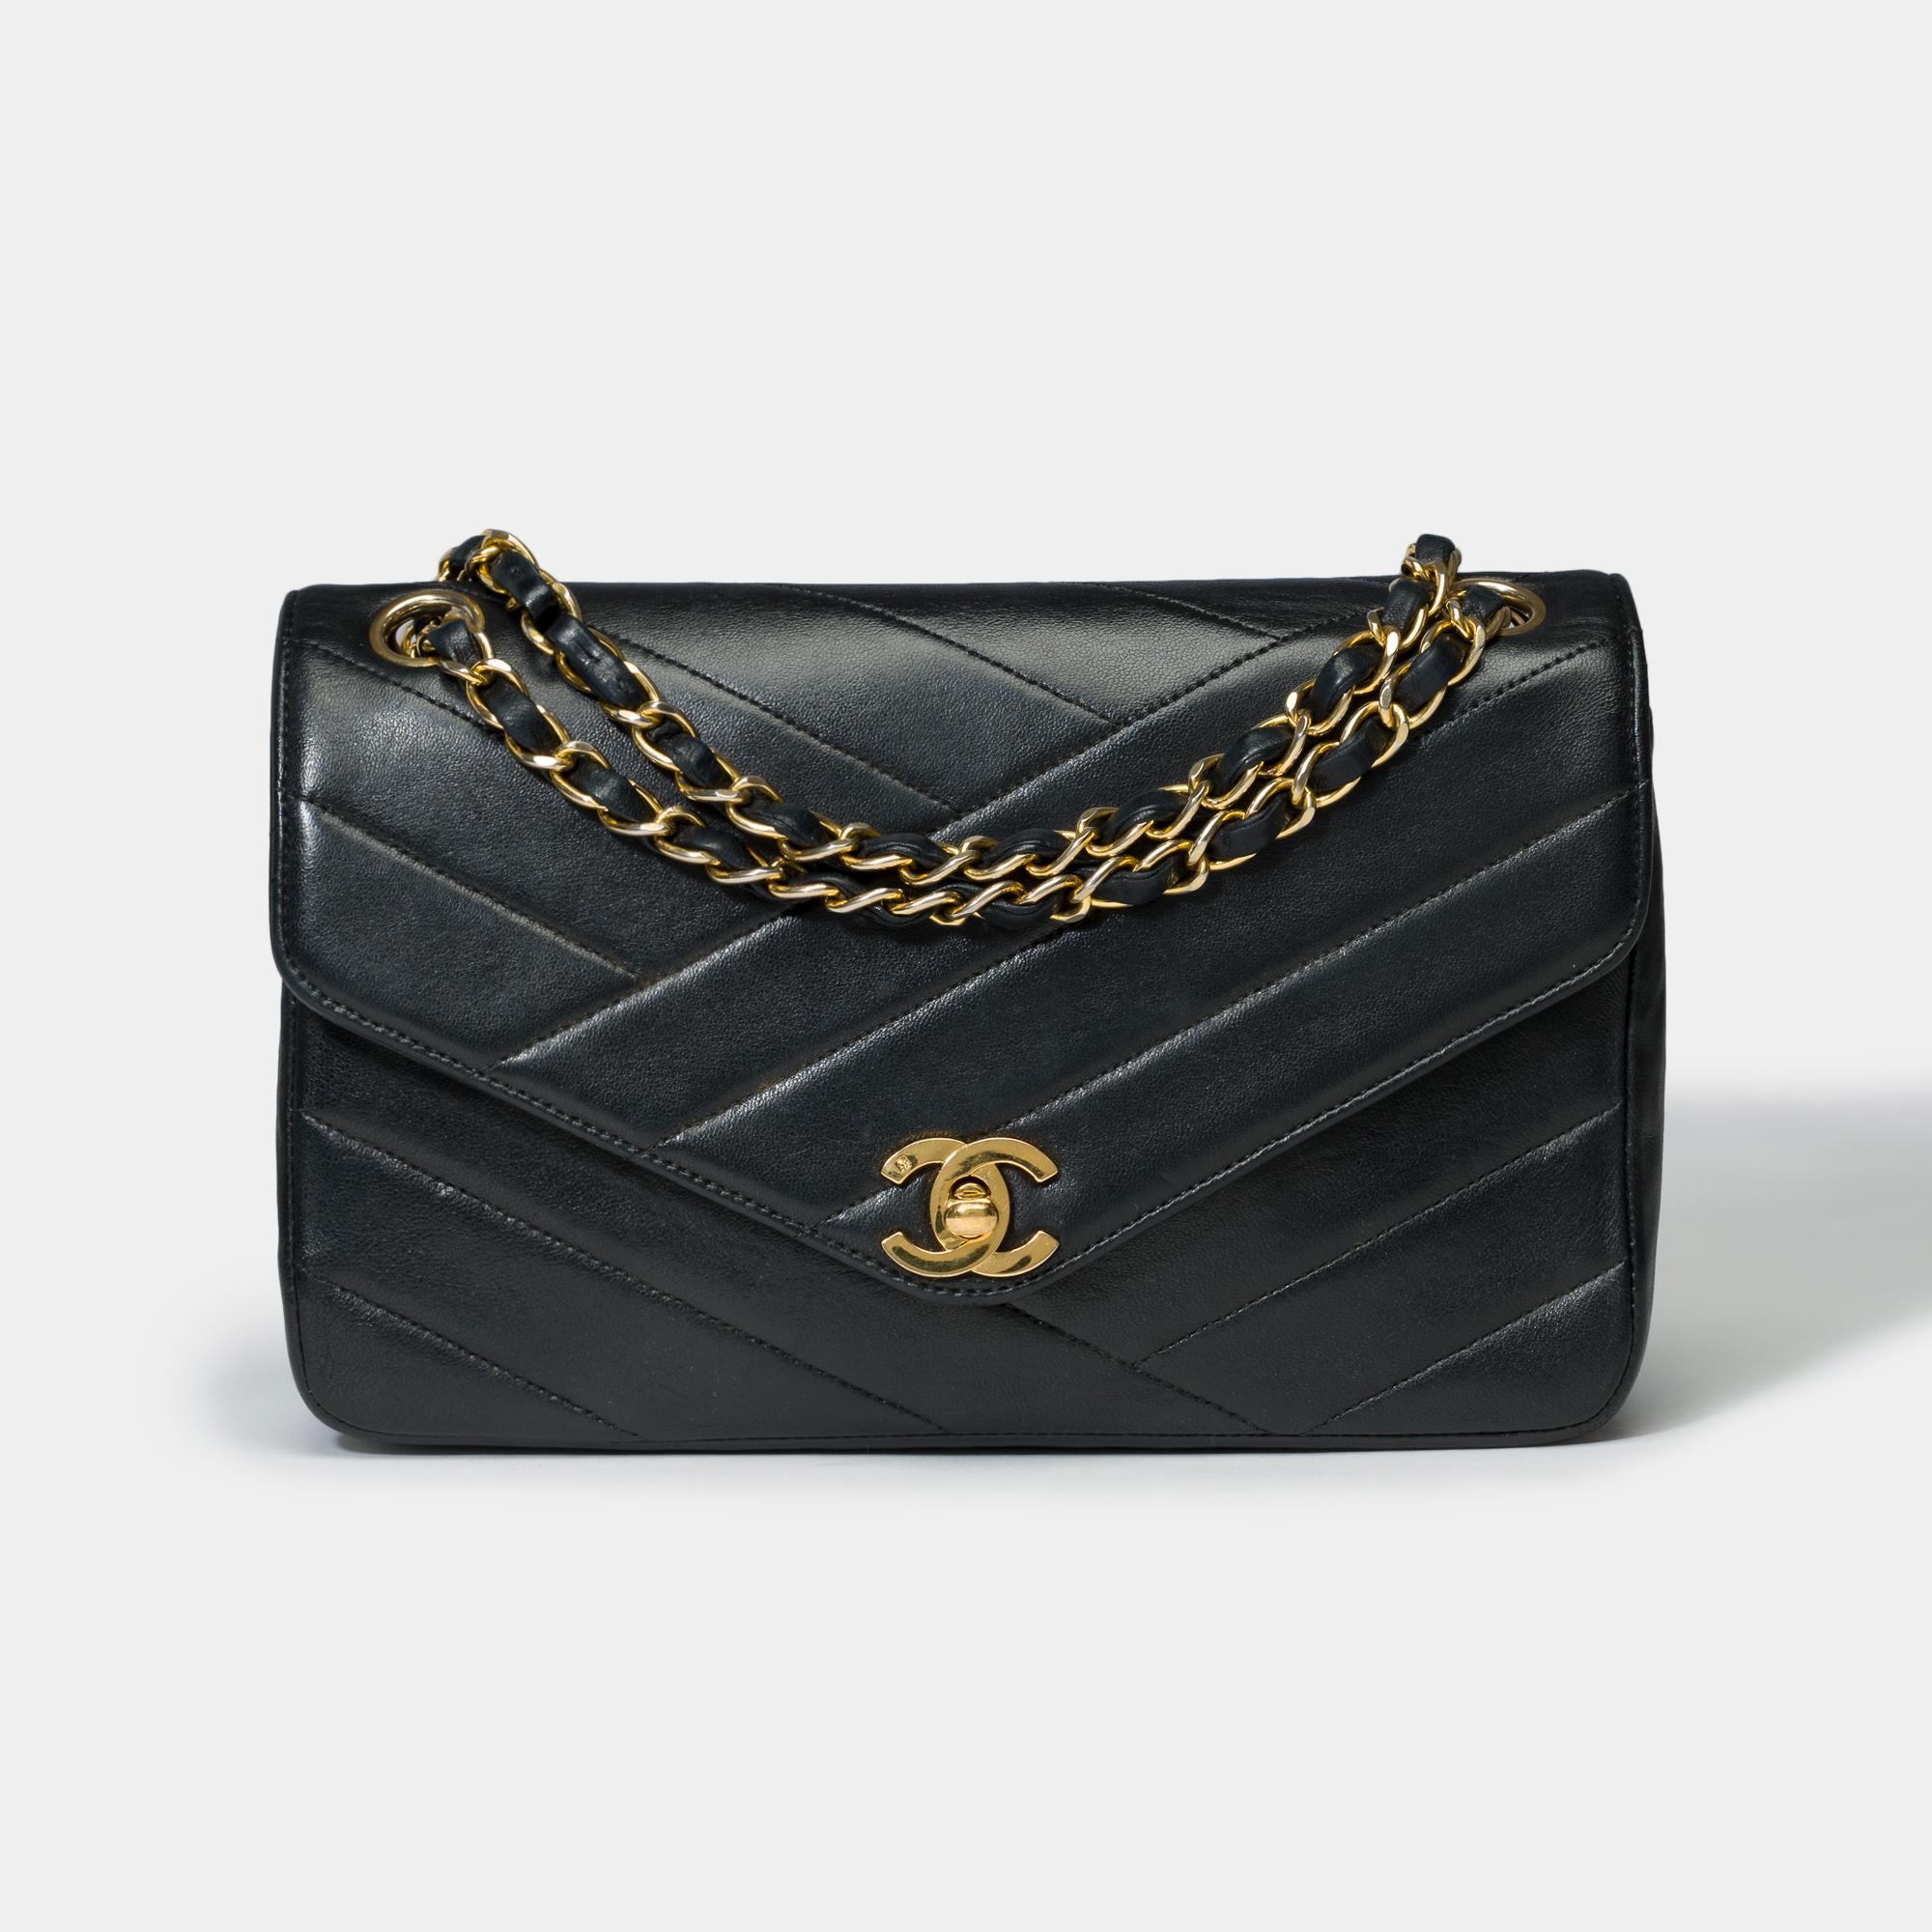 Gorgeous​ ​Chanel​ ​Timeless/Classic​ ​single​ ​flap​ ​shoulder​ ​bag​ ​in​ ​black​ ​herringbone​ ​quilted​ ​lambskin​ ​leather,​ ​gold​ ​metal​ ​trim,​ ​a​ ​gold​ ​metal​ ​chain​ ​handle​ ​interlaced​ ​with​ ​black​ ​leather​ ​for​ ​a​ ​hand​ ​or​